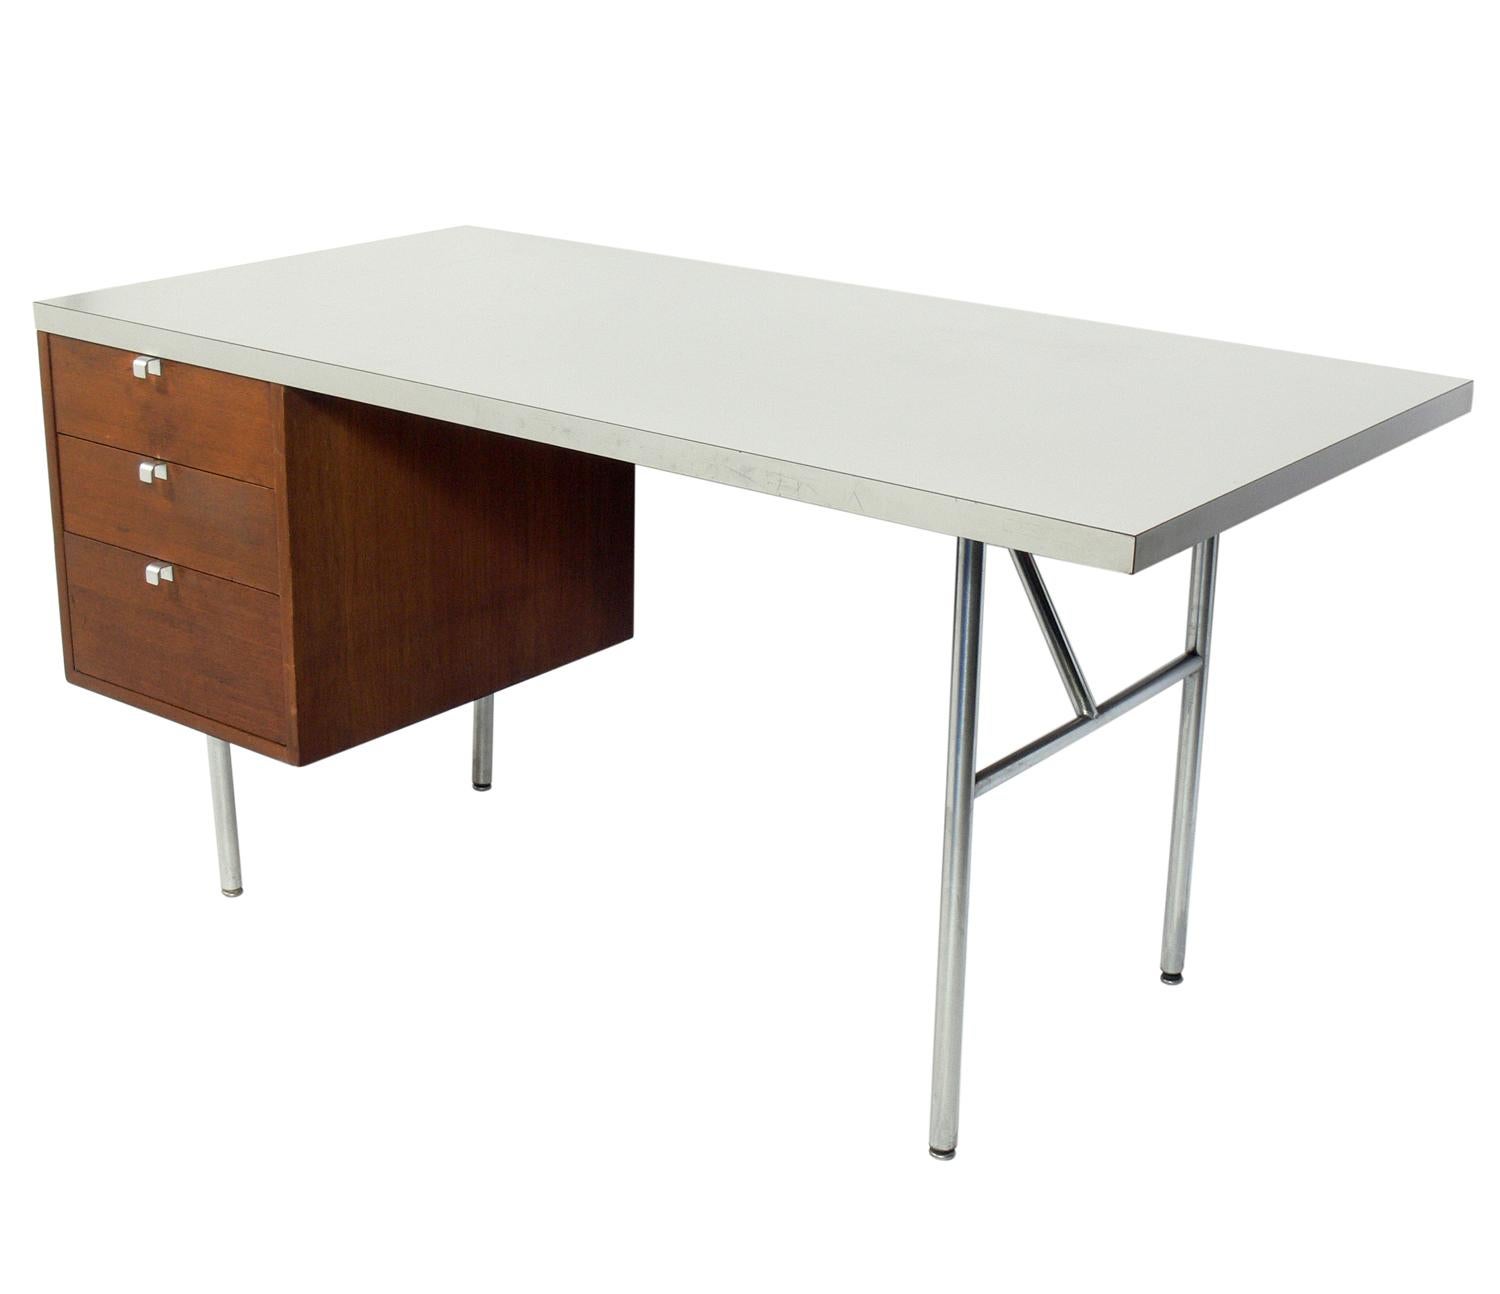 Clean Lined Desk, designed by George Nelson for Herman Miller, American, circa 1950s.